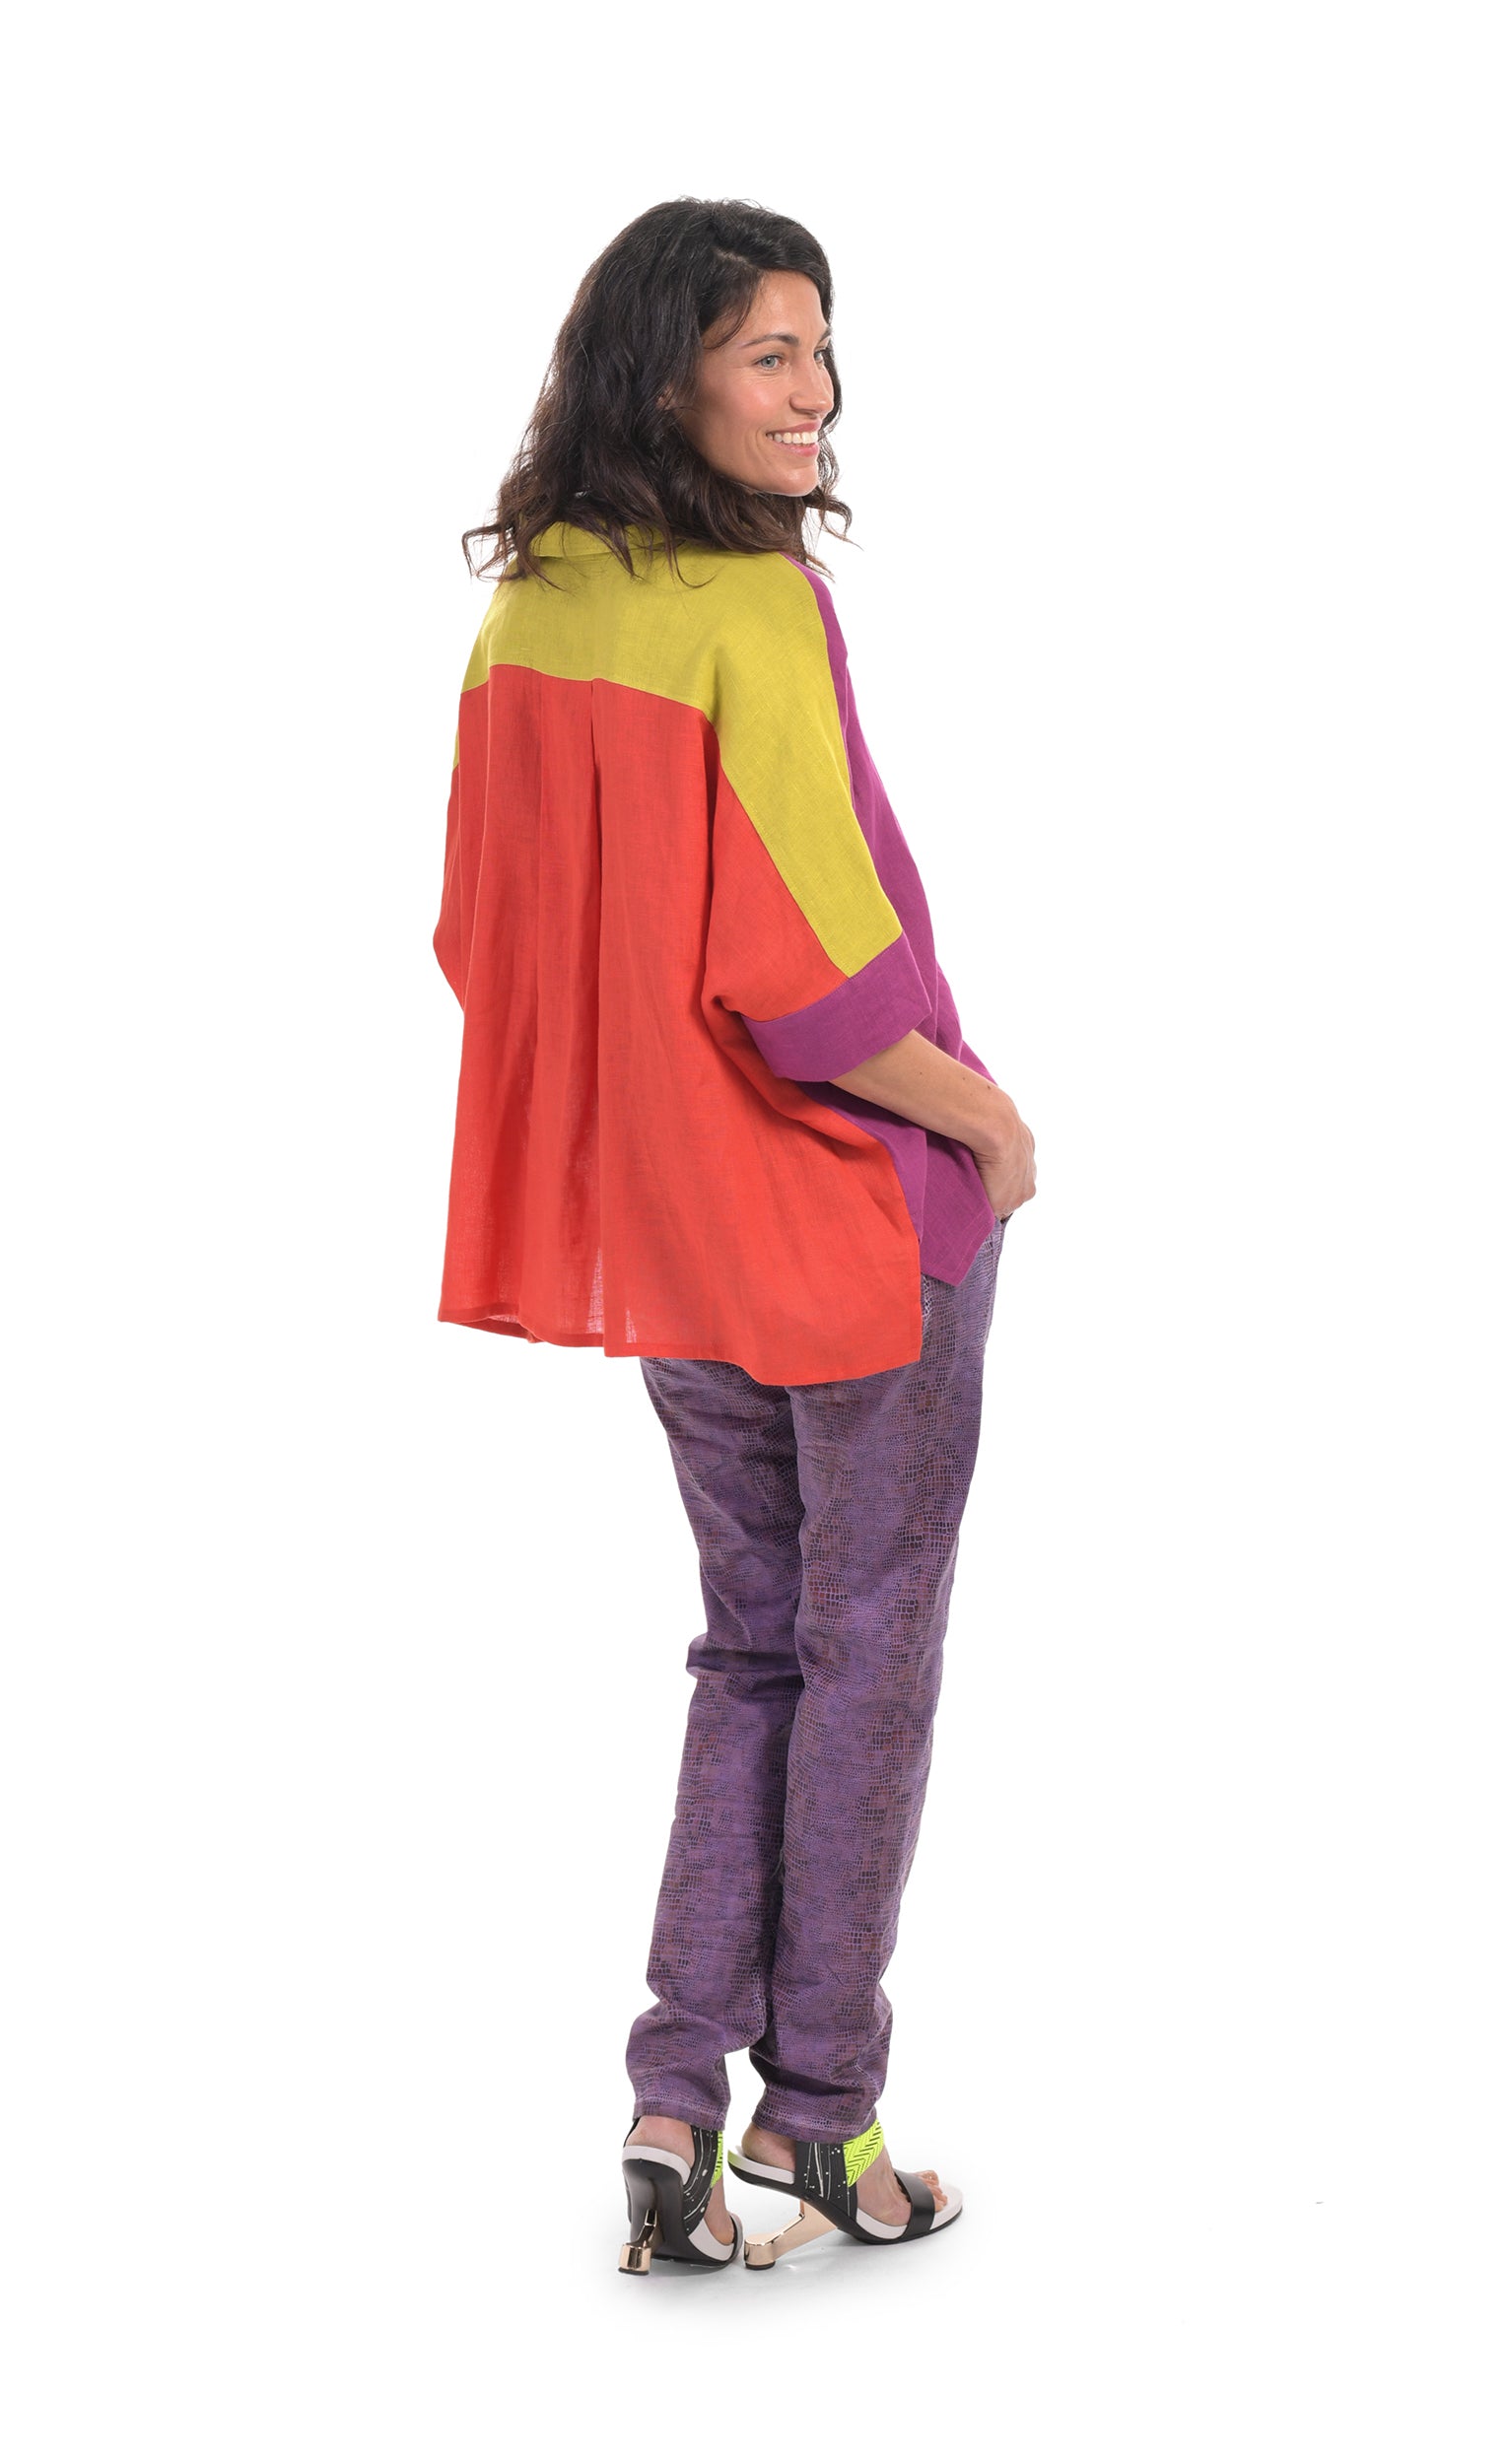 Back full body view of a woman wearing the alembika colorblock linen shirt. This shirt is red on the back, purple on the right side and yellow on shoulder and sleeve sides. The shirt has a button up front, a shirt collar, and elbow length sleeves. On the bottom, the model is wearing purple pants.